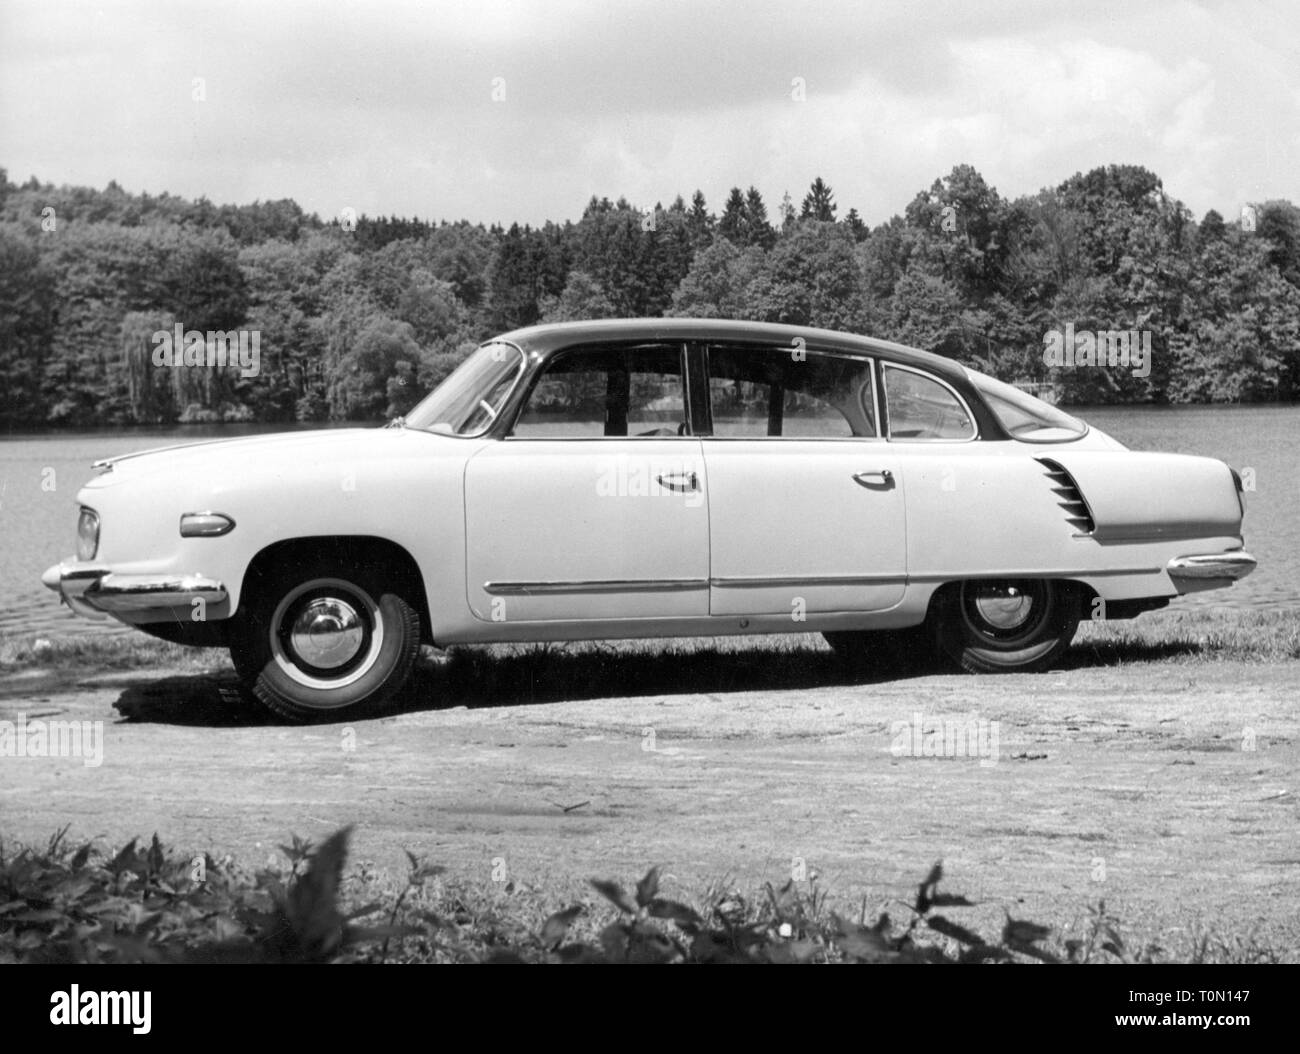 transport / transportation, car, vehicle variants, Tatra 603, view from left, Czechoslovakia, 20.6.1956, landscape, landscapes, side view, four-door, six-seater, aerodynamic car body, limousine, luxury, luxuries, upper class, upper-class, motor car, auto, automobile, passenger car, motorcar, motorcars, autos, automobiles, passenger cars, Czech, CSSR, Eastern bloc, 1950s, 50s, 20th century, no-people, transport, transportation, car, cars, view, views, historic, historical, Additional-Rights-Clearance-Info-Not-Available Stock Photo